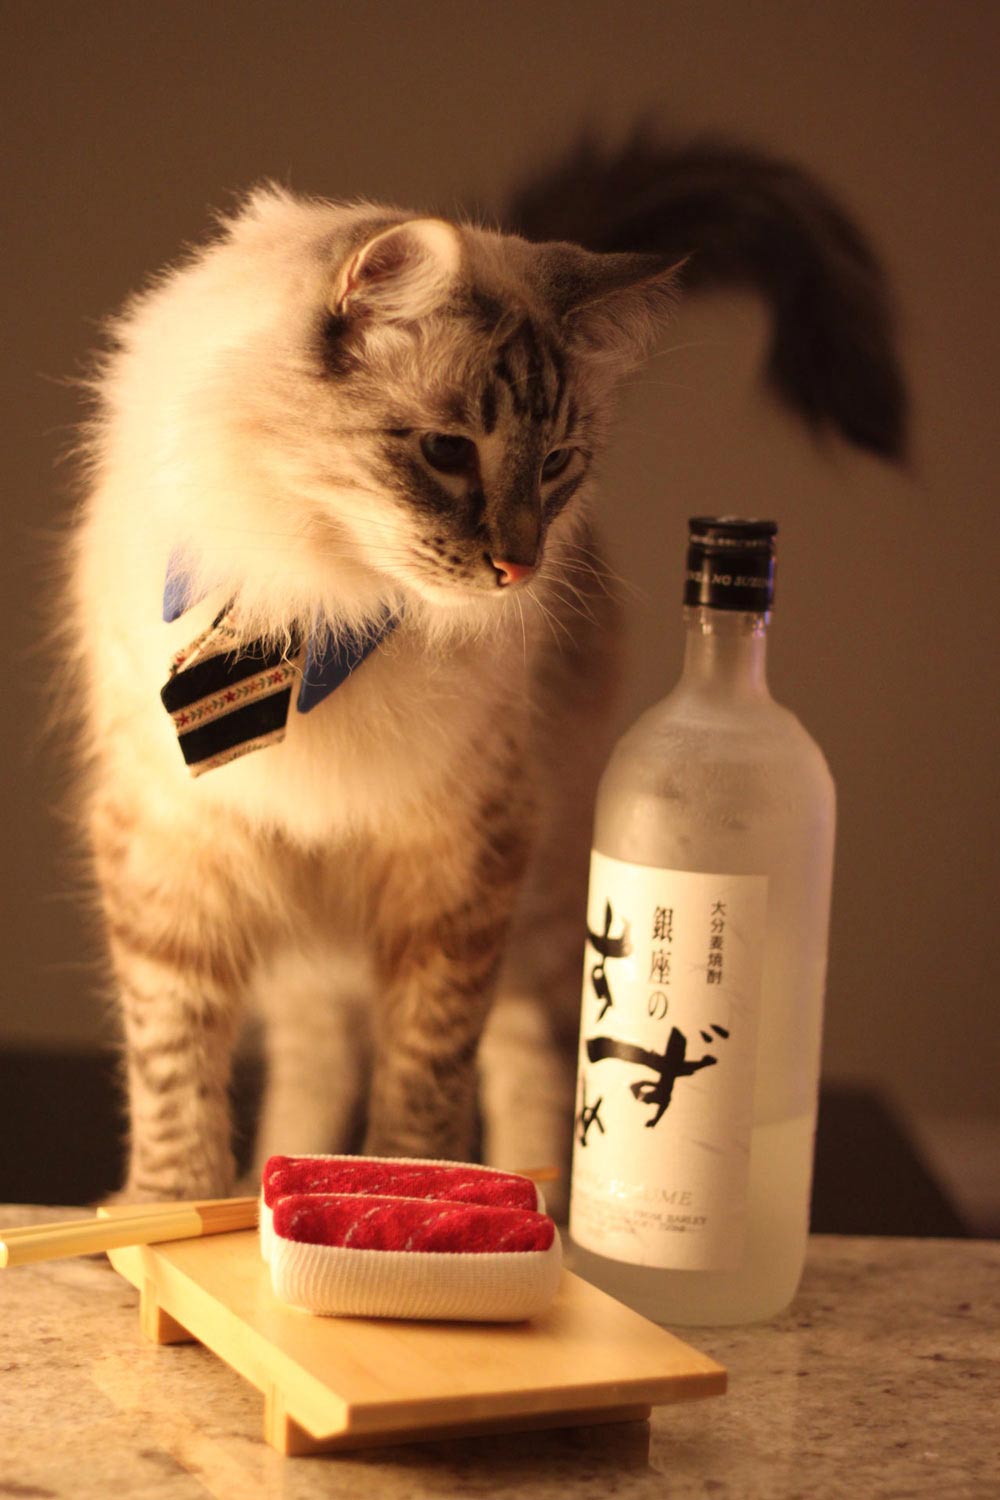 I too would like to sample your sushi socks, says the cat.